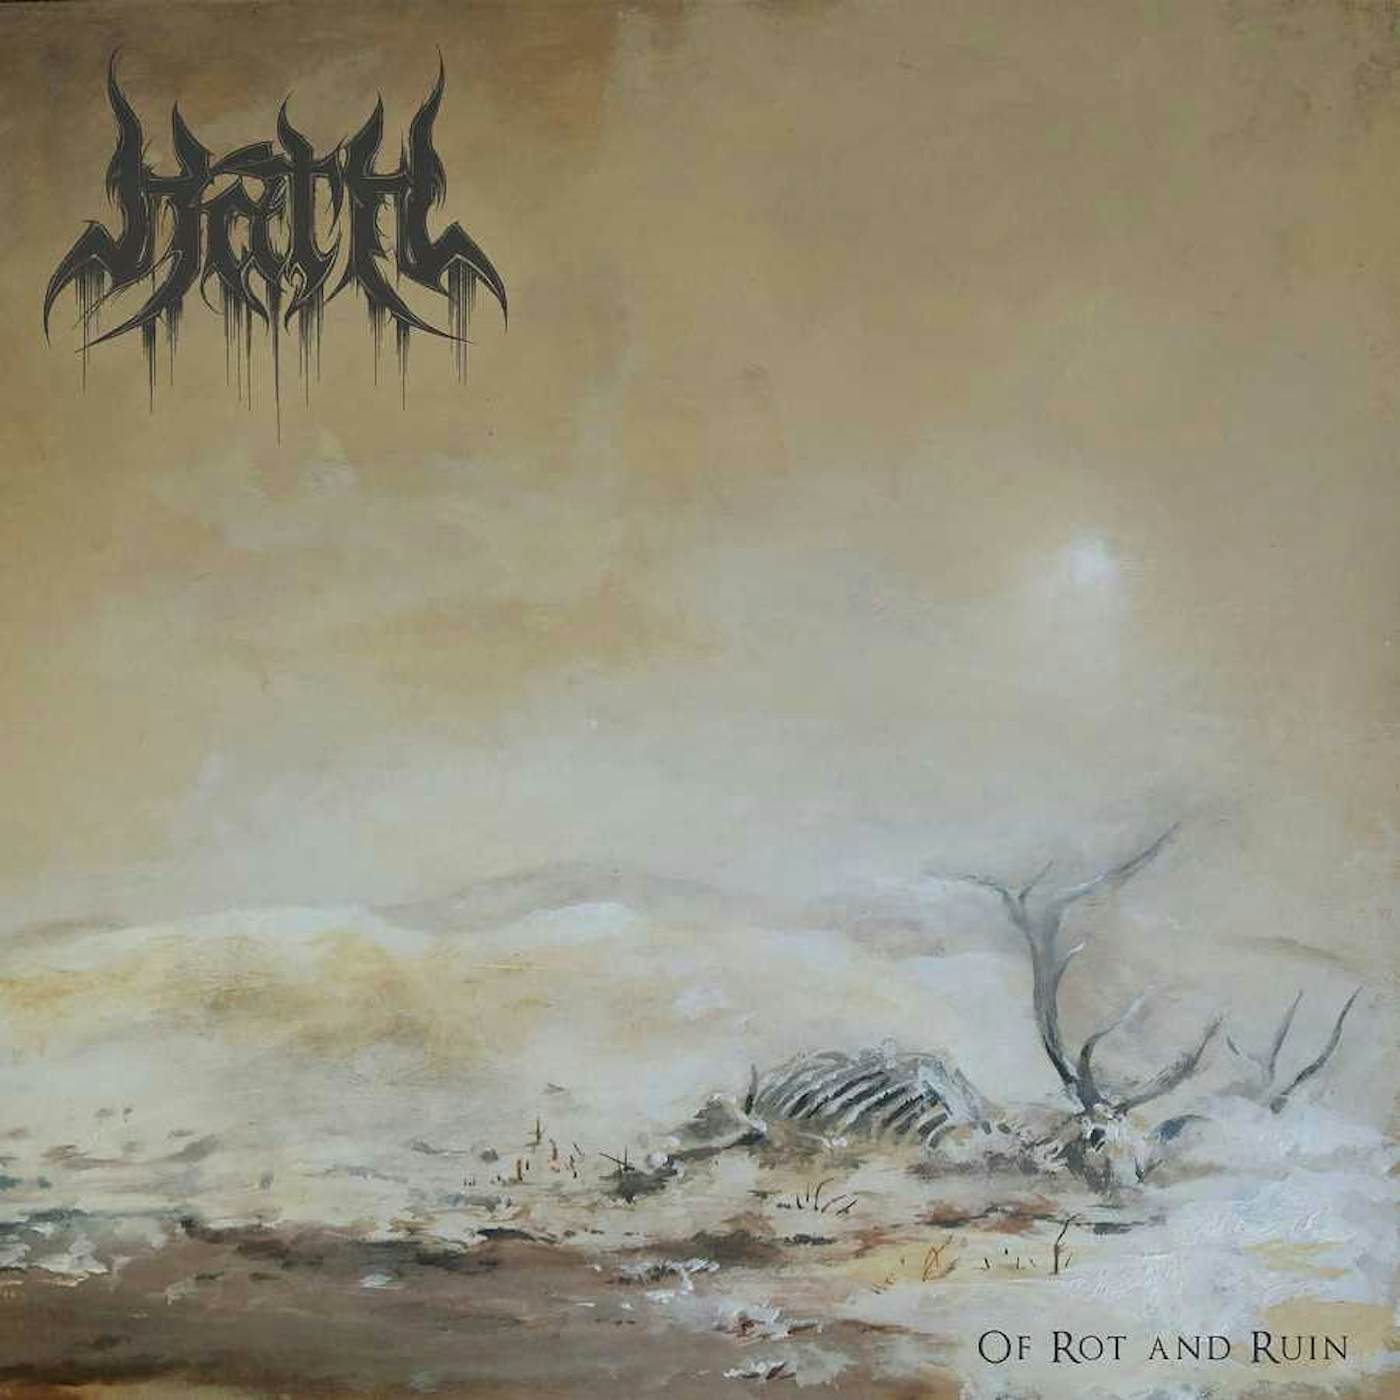 Hath Of Rot And Ruin Vinyl Record